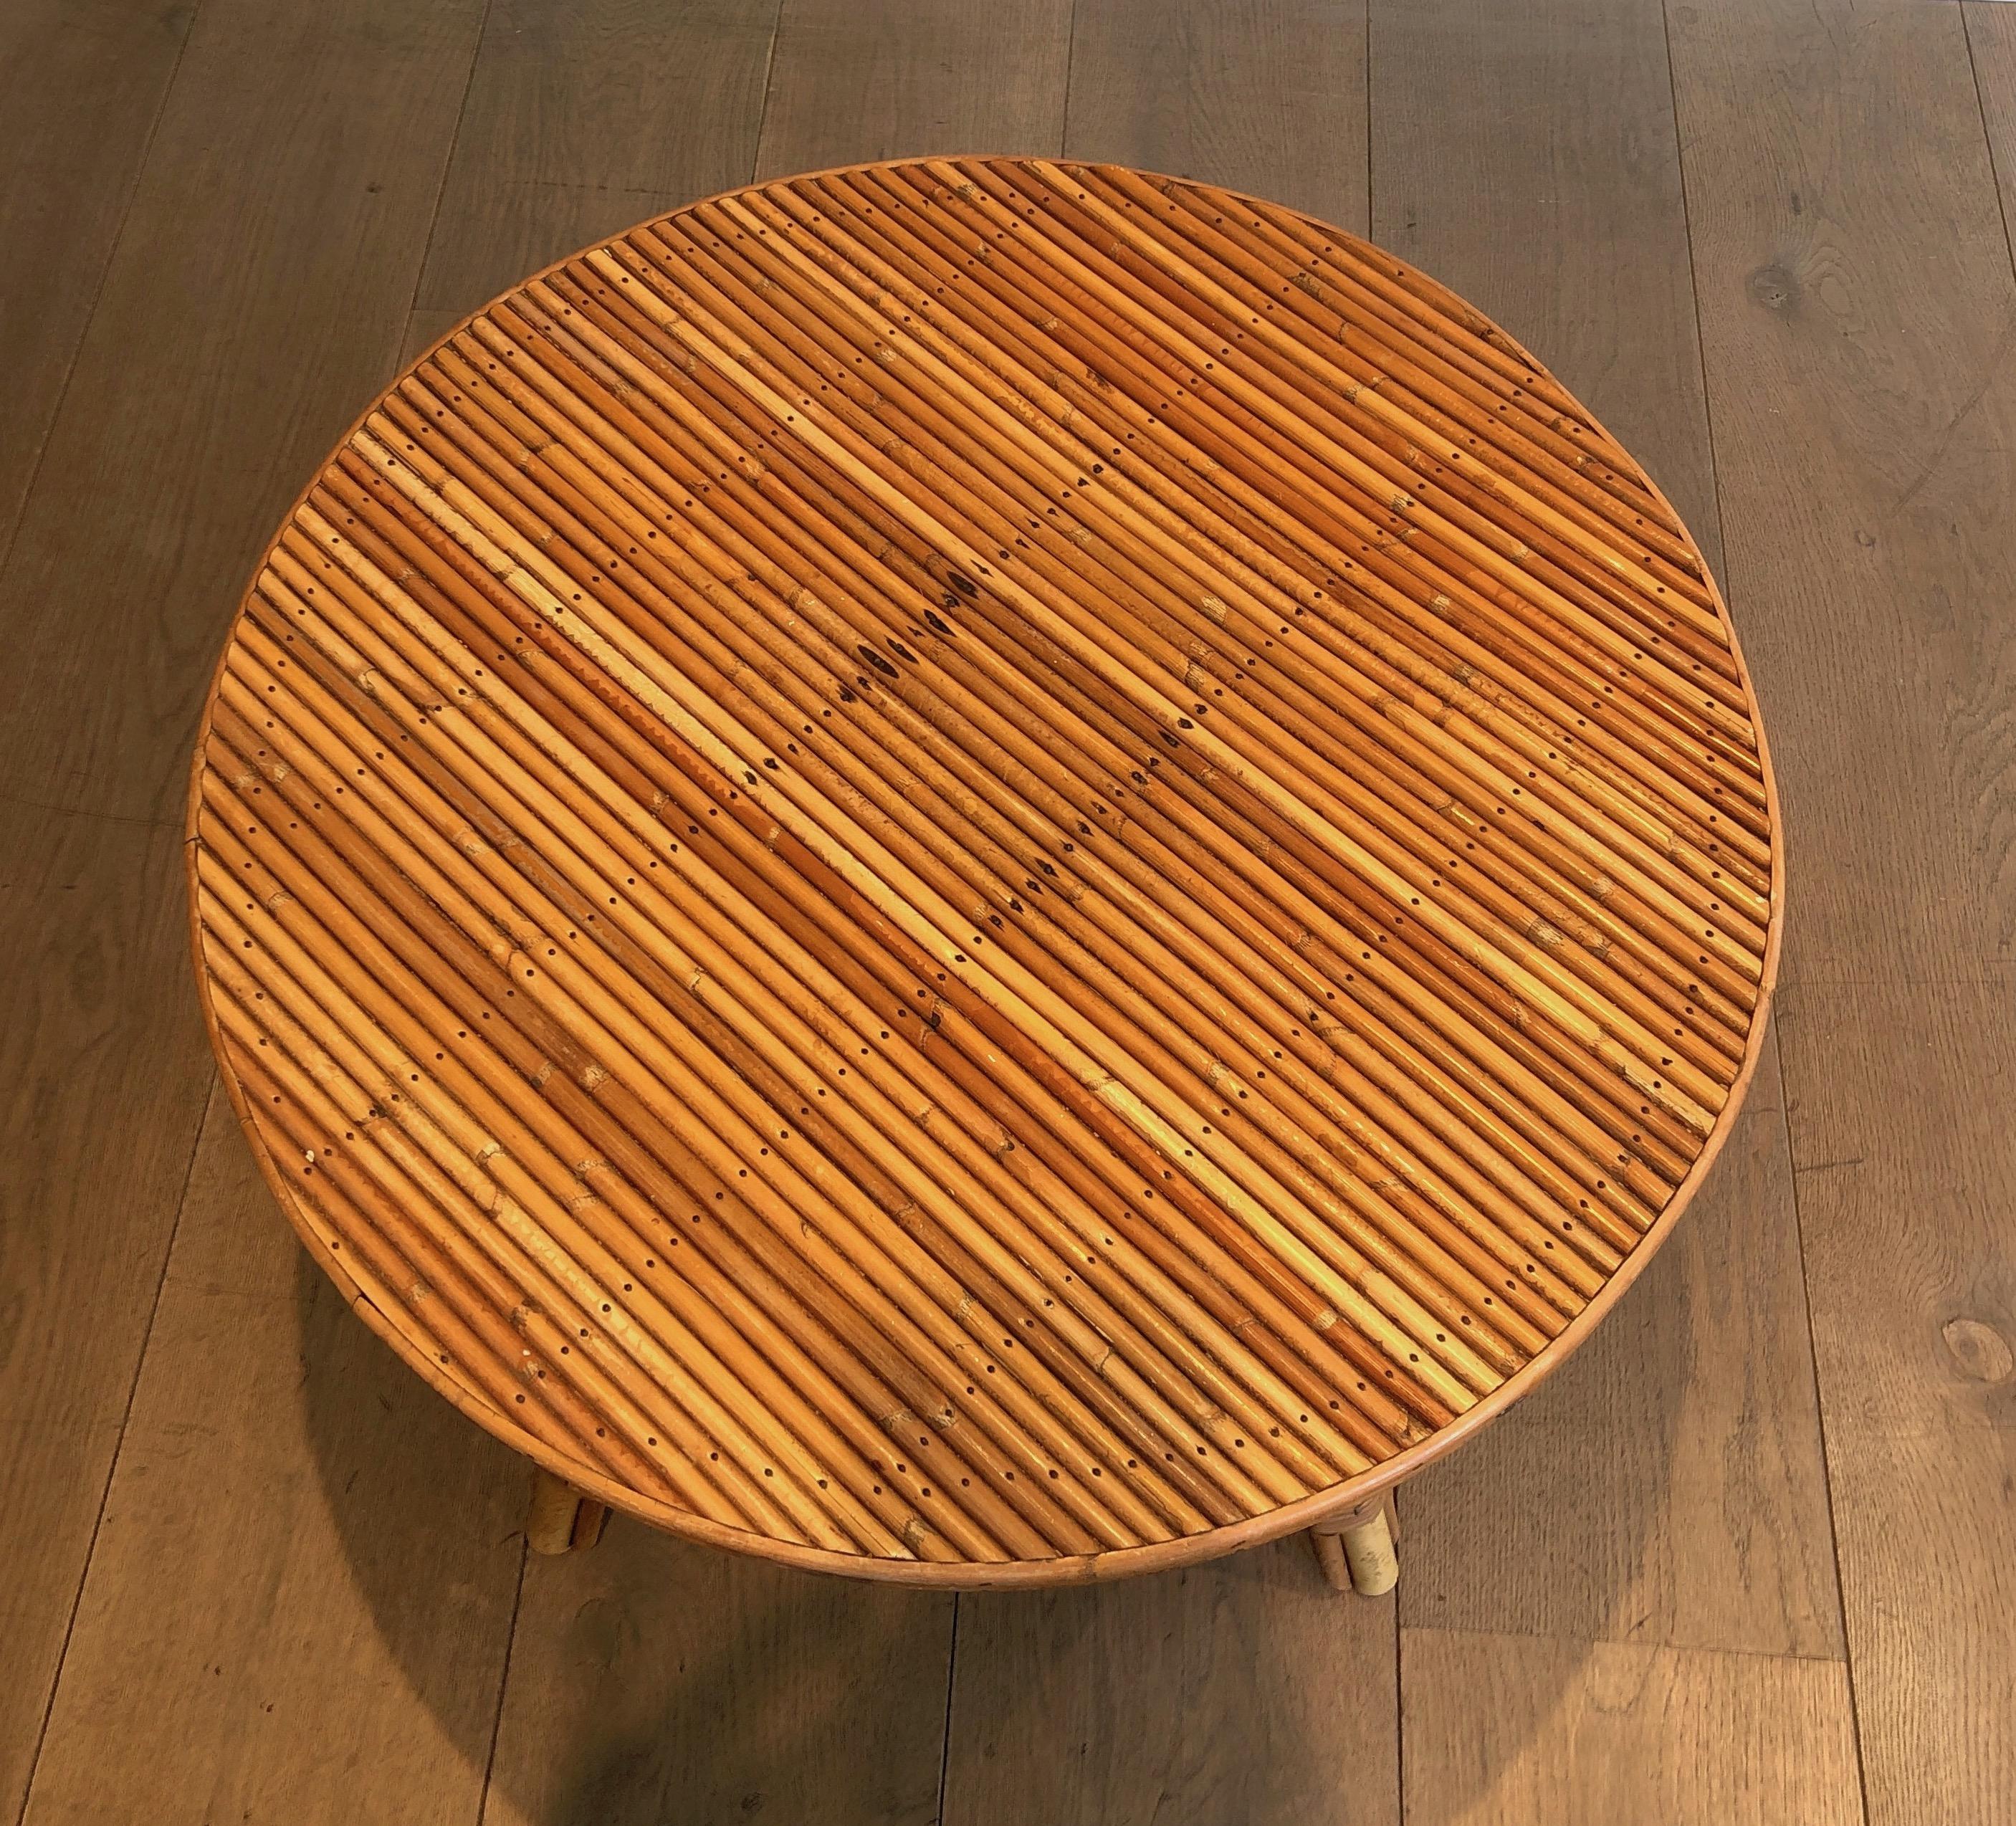 Mid-20th Century Round Rattan Coffee Table Attributed to Audoux Minet. French Work, Circa 1950